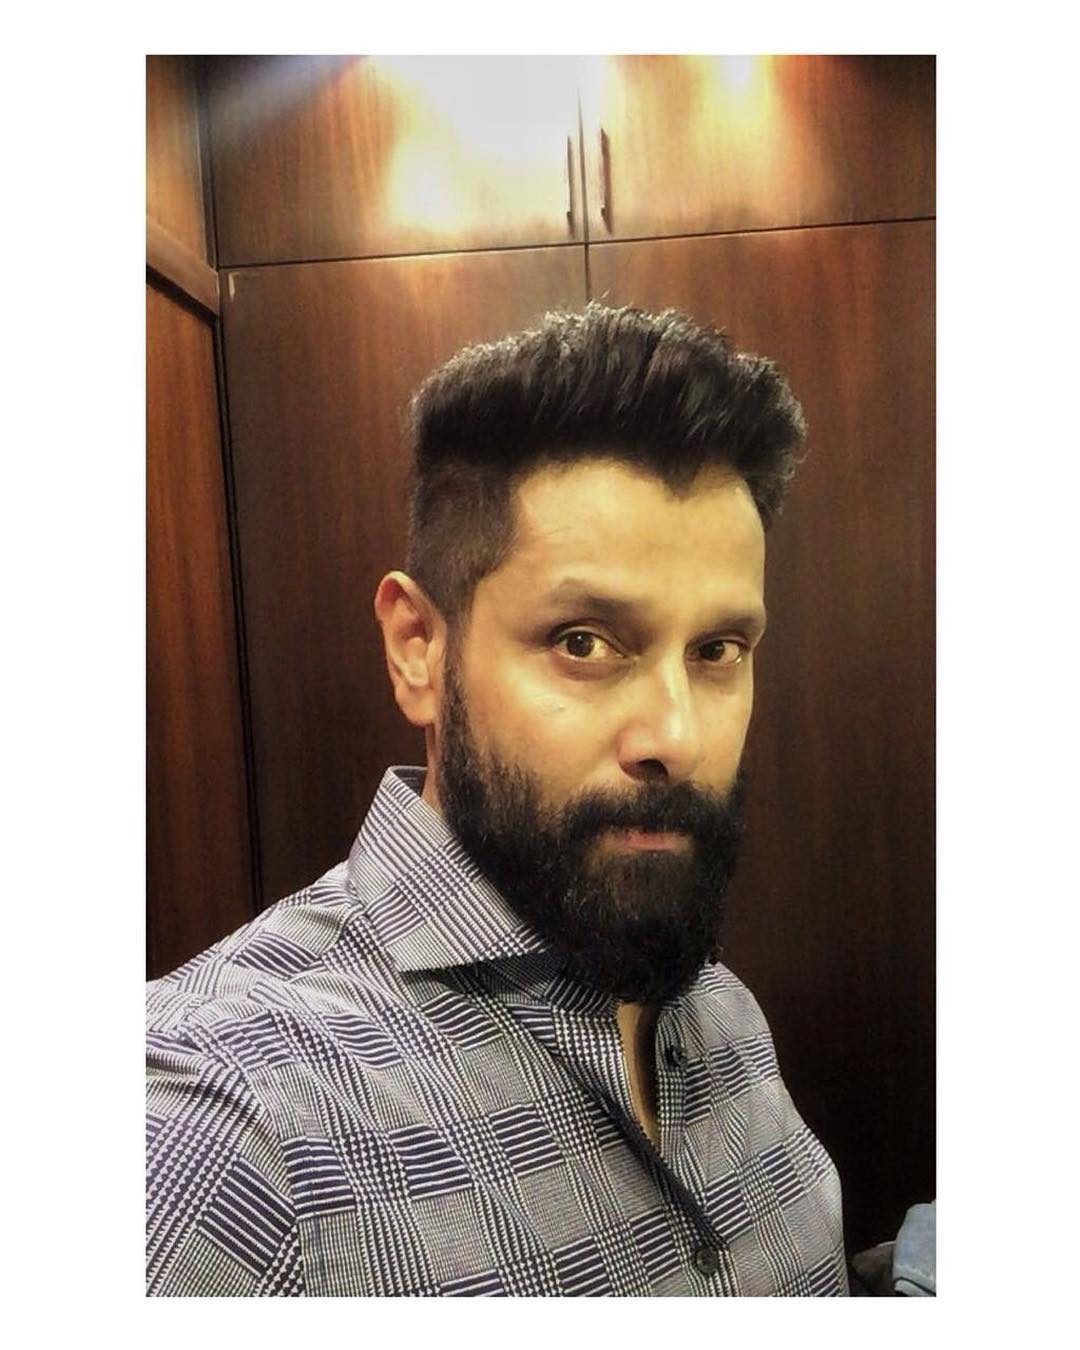 South Indian actor - Vikram